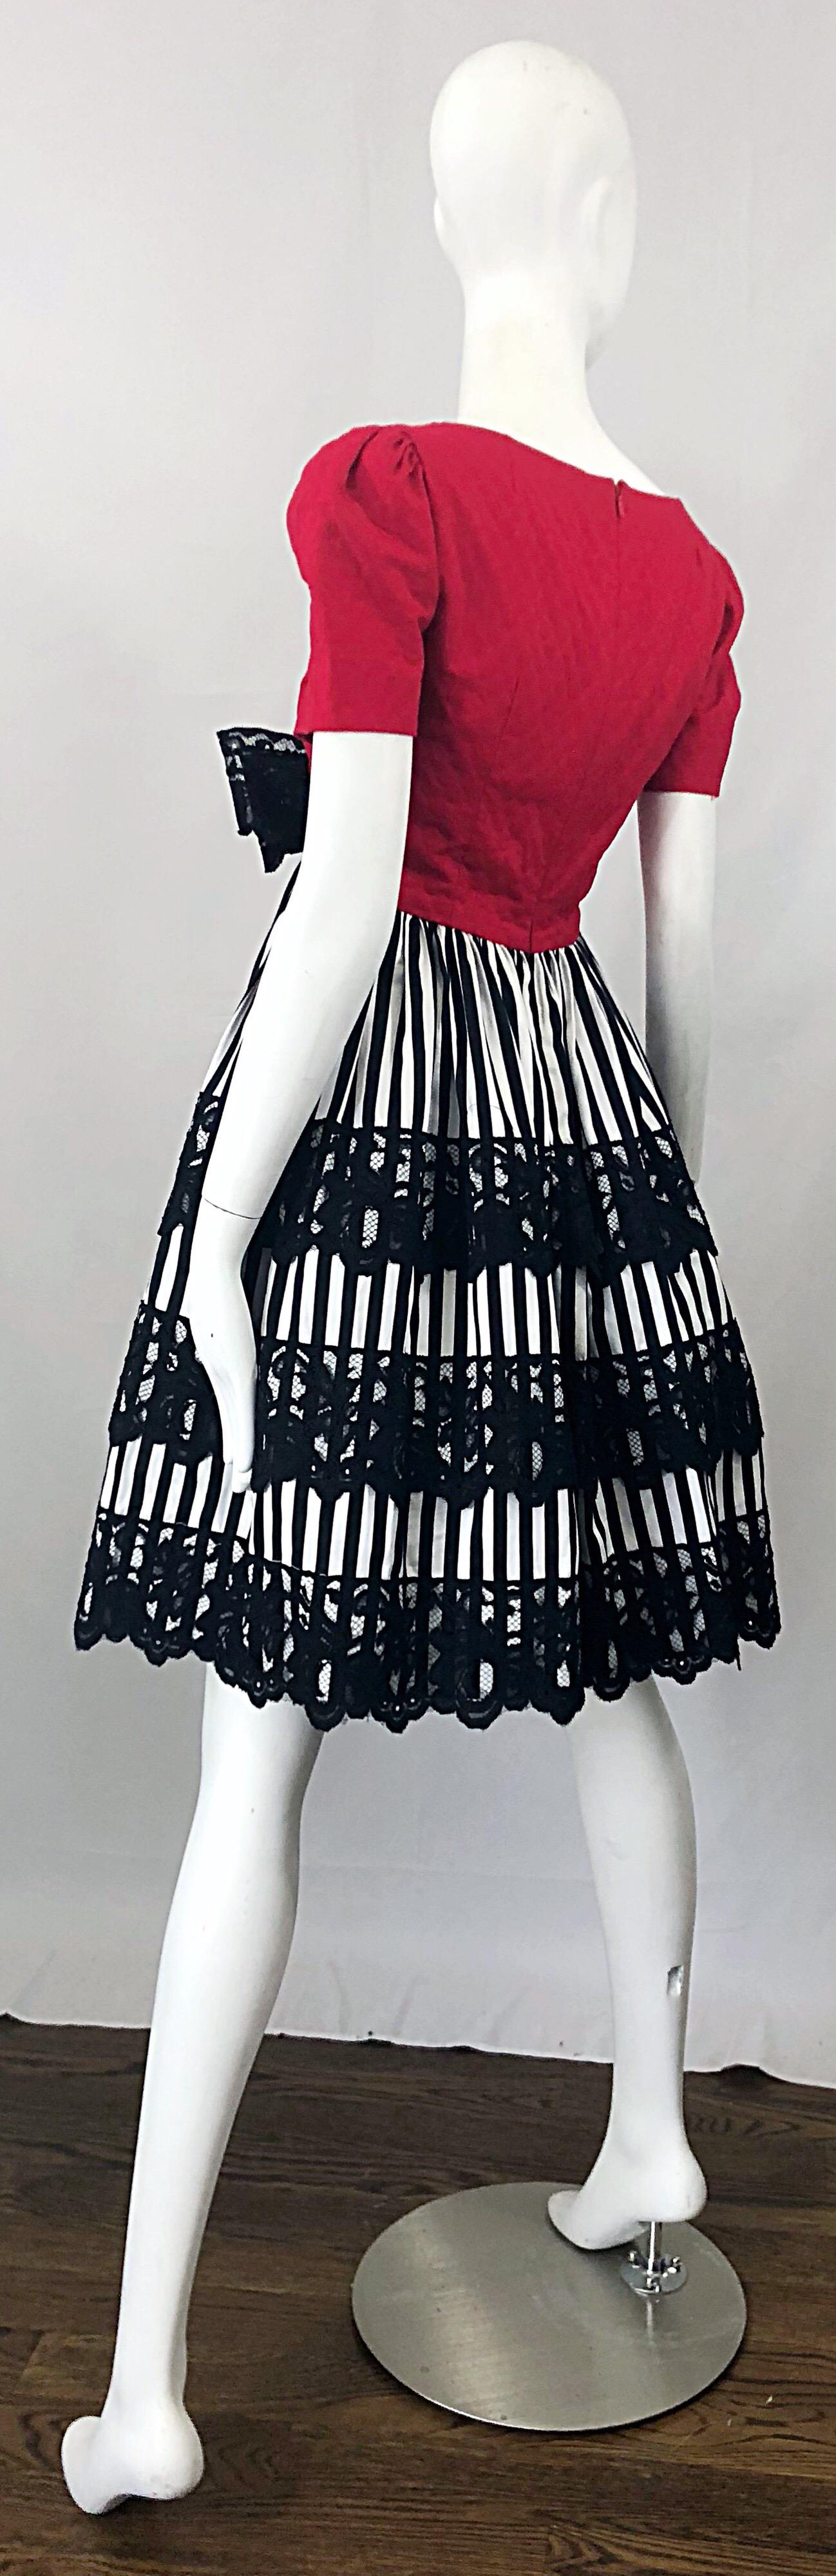 Vintage Adele Simpson 1980s Red Black White Fit n' Flare Empire Bow Lace Dress 5